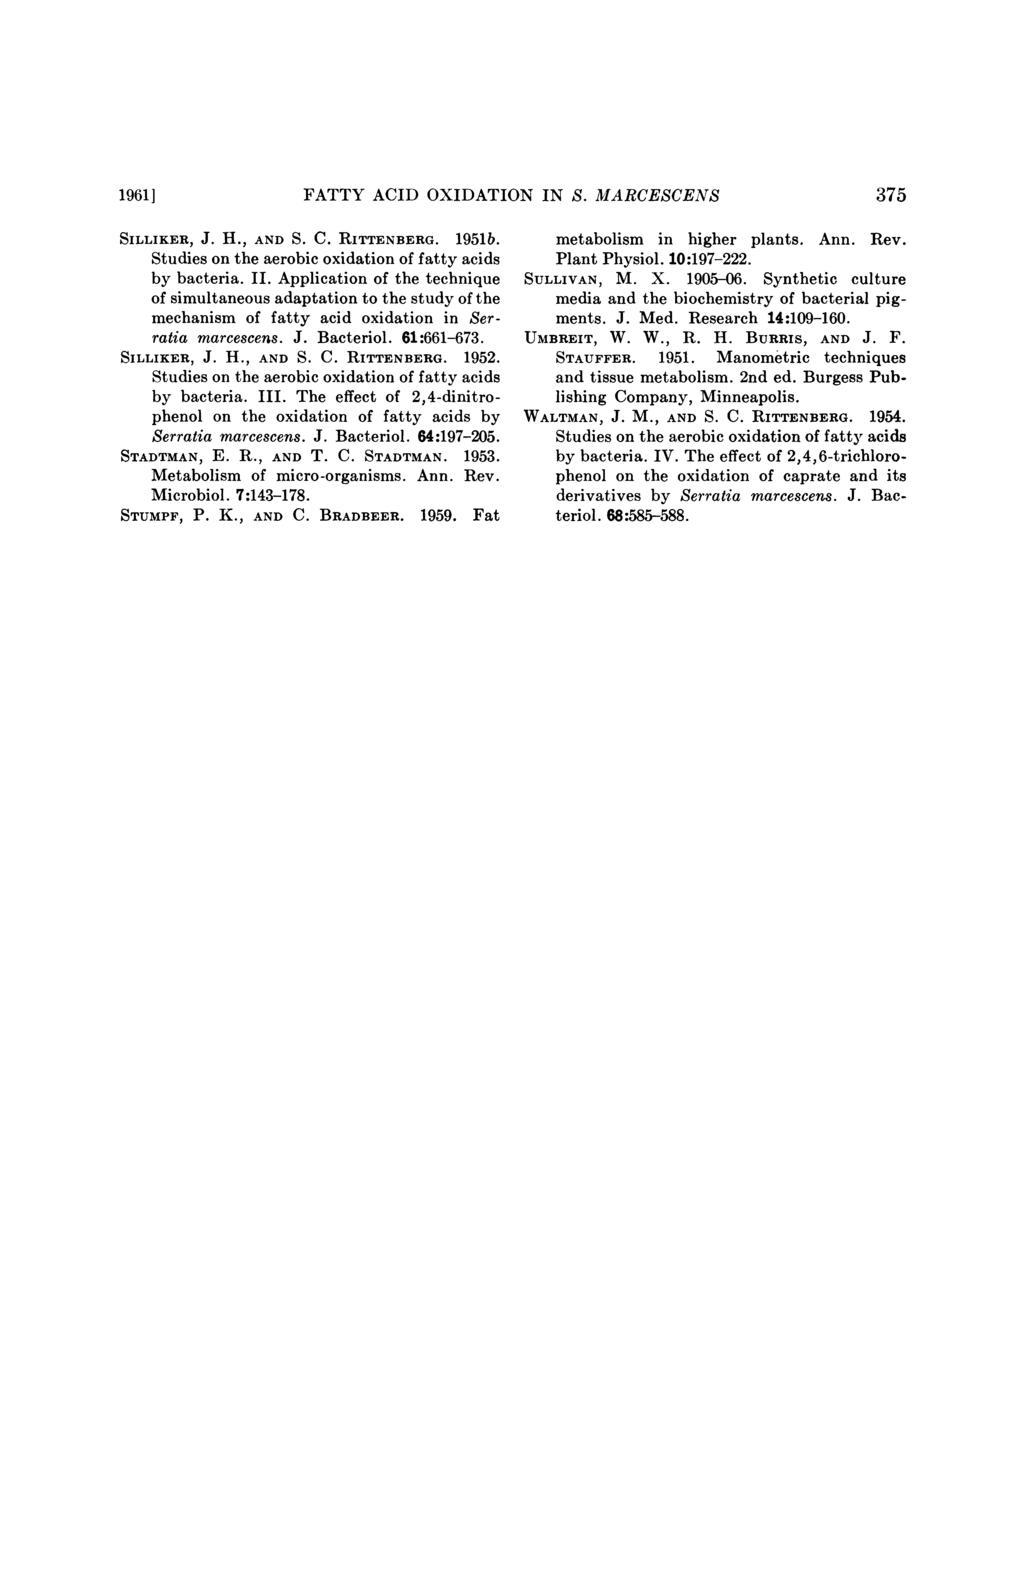 1961] FATTY ACID OXIDATION IN S. MARCESCENS 375 SILLIKER, J. H., AND S. C. RITTENBERG. 1951b. Studies on the aerobic oxidation of fatty acids by bacteria. II.